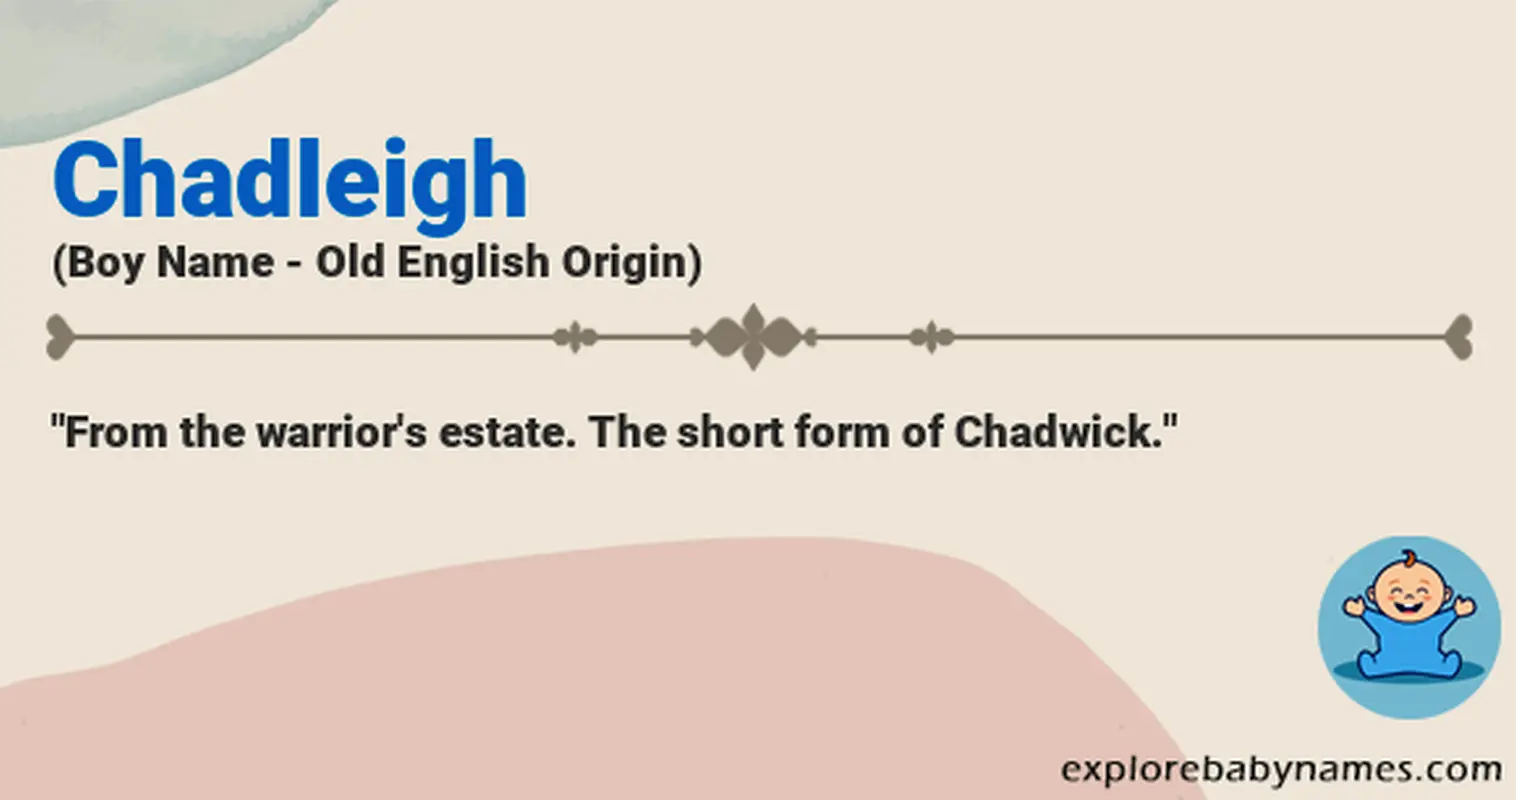 Meaning of Chadleigh